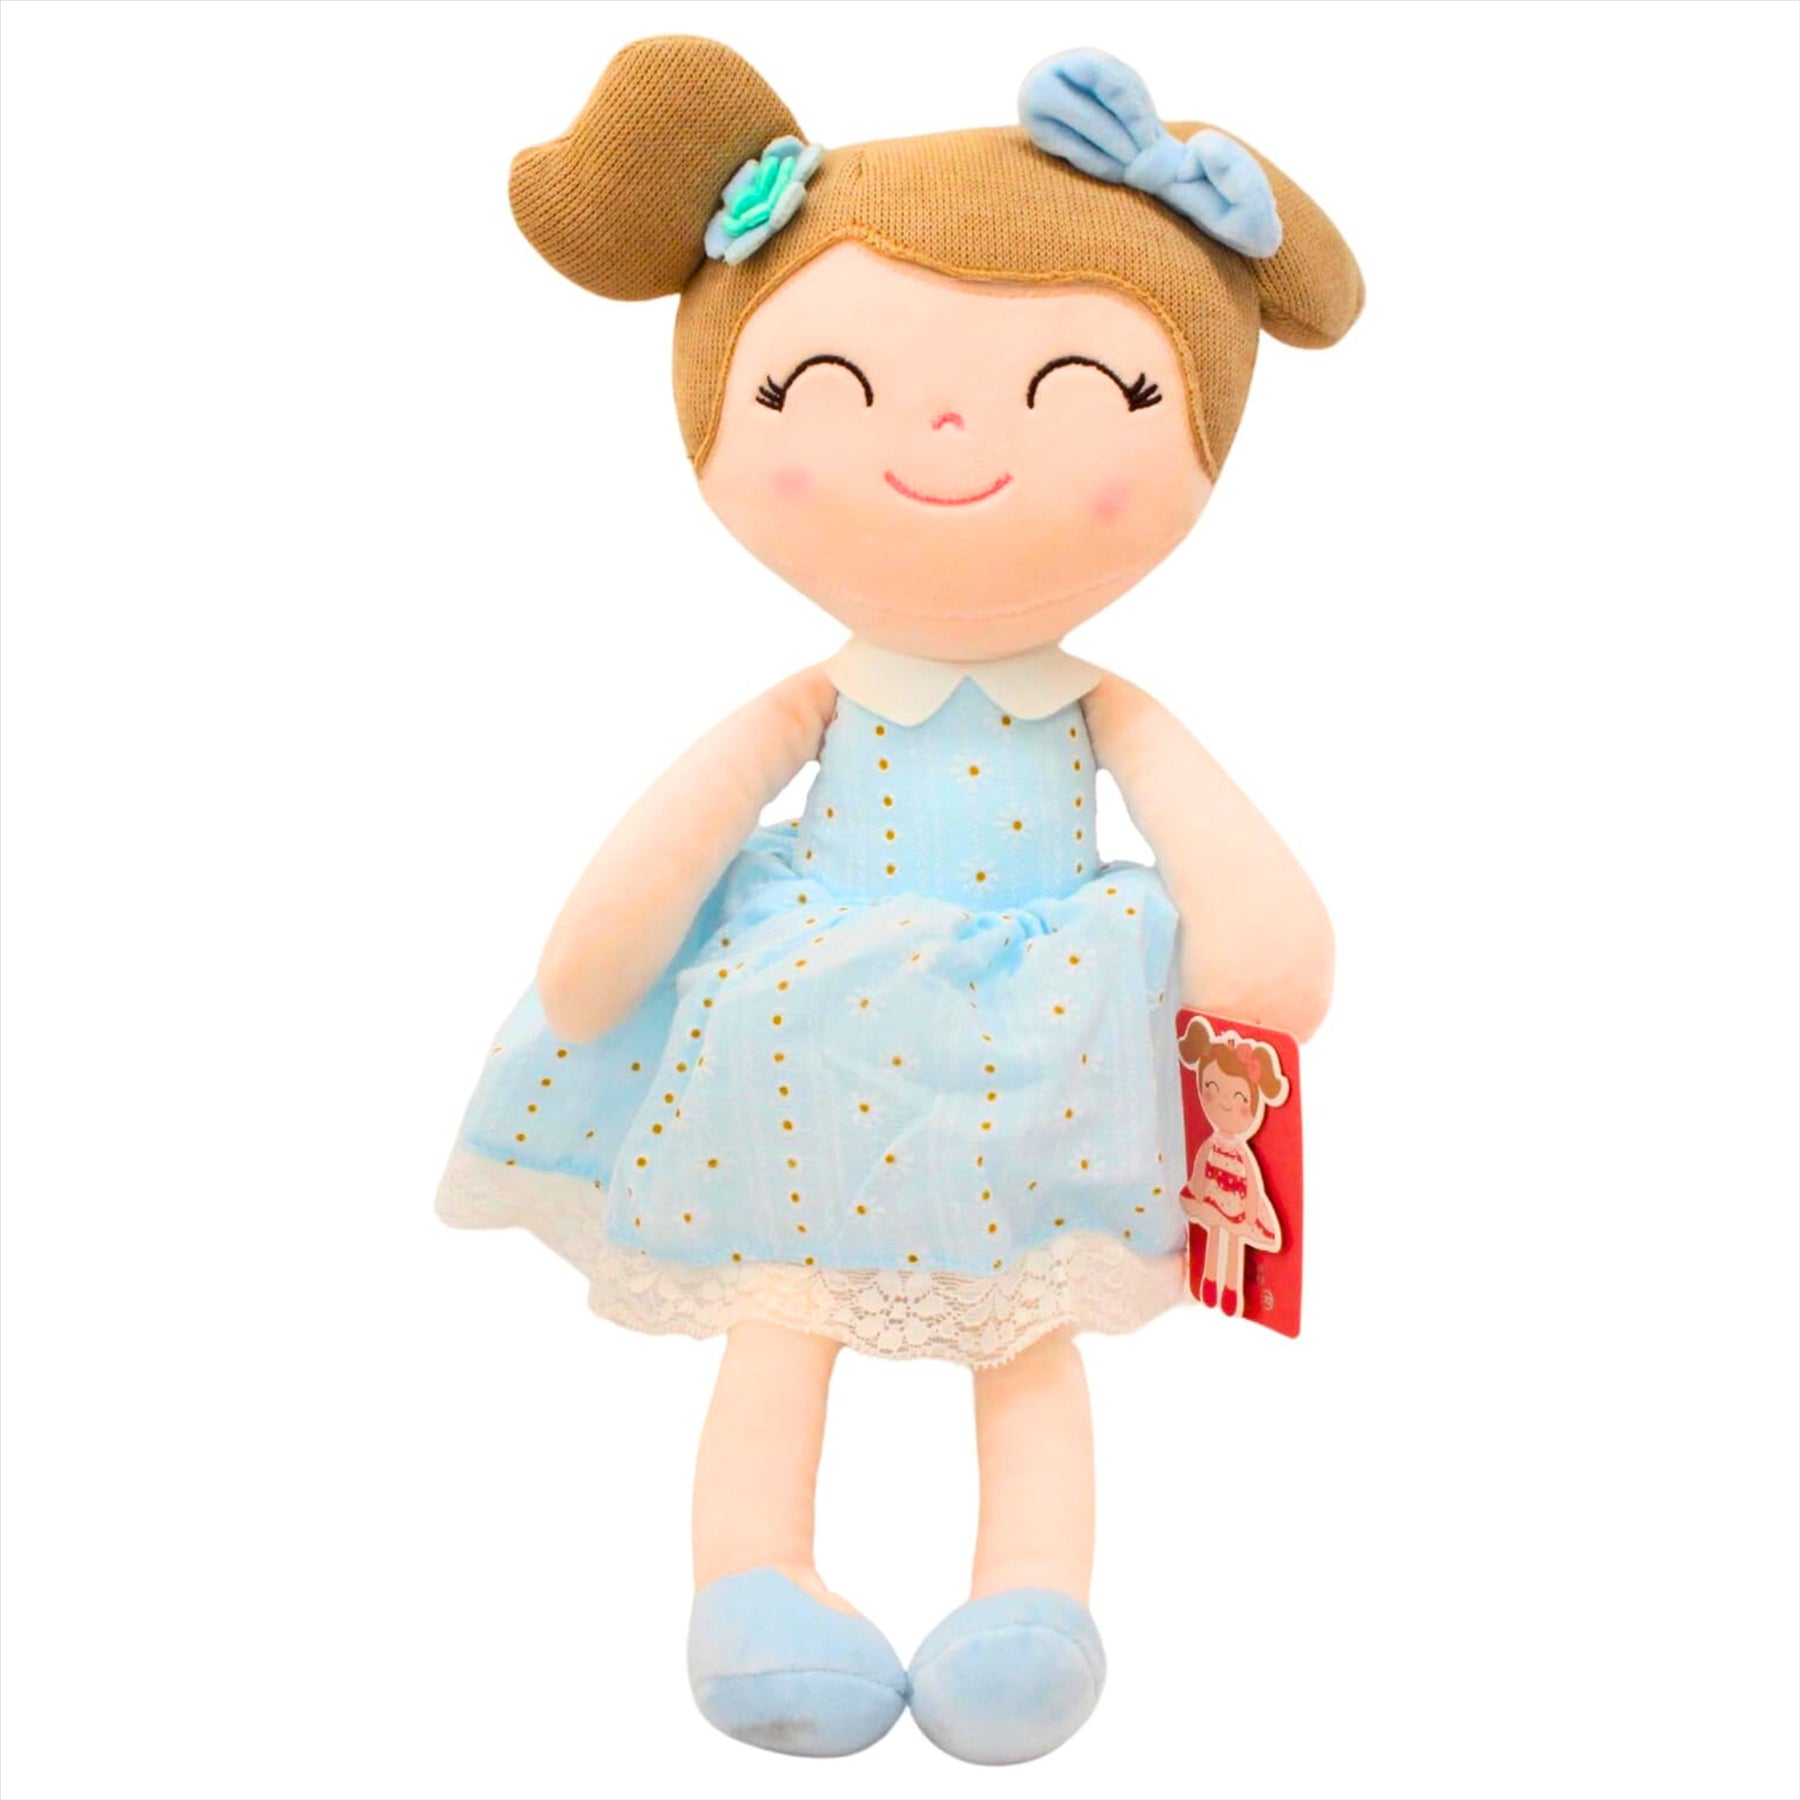 Gloveleya Super Soft Embroidered Blue Daisy 40cm Plush Doll with 42 Glow in the Dark Owls and Stars